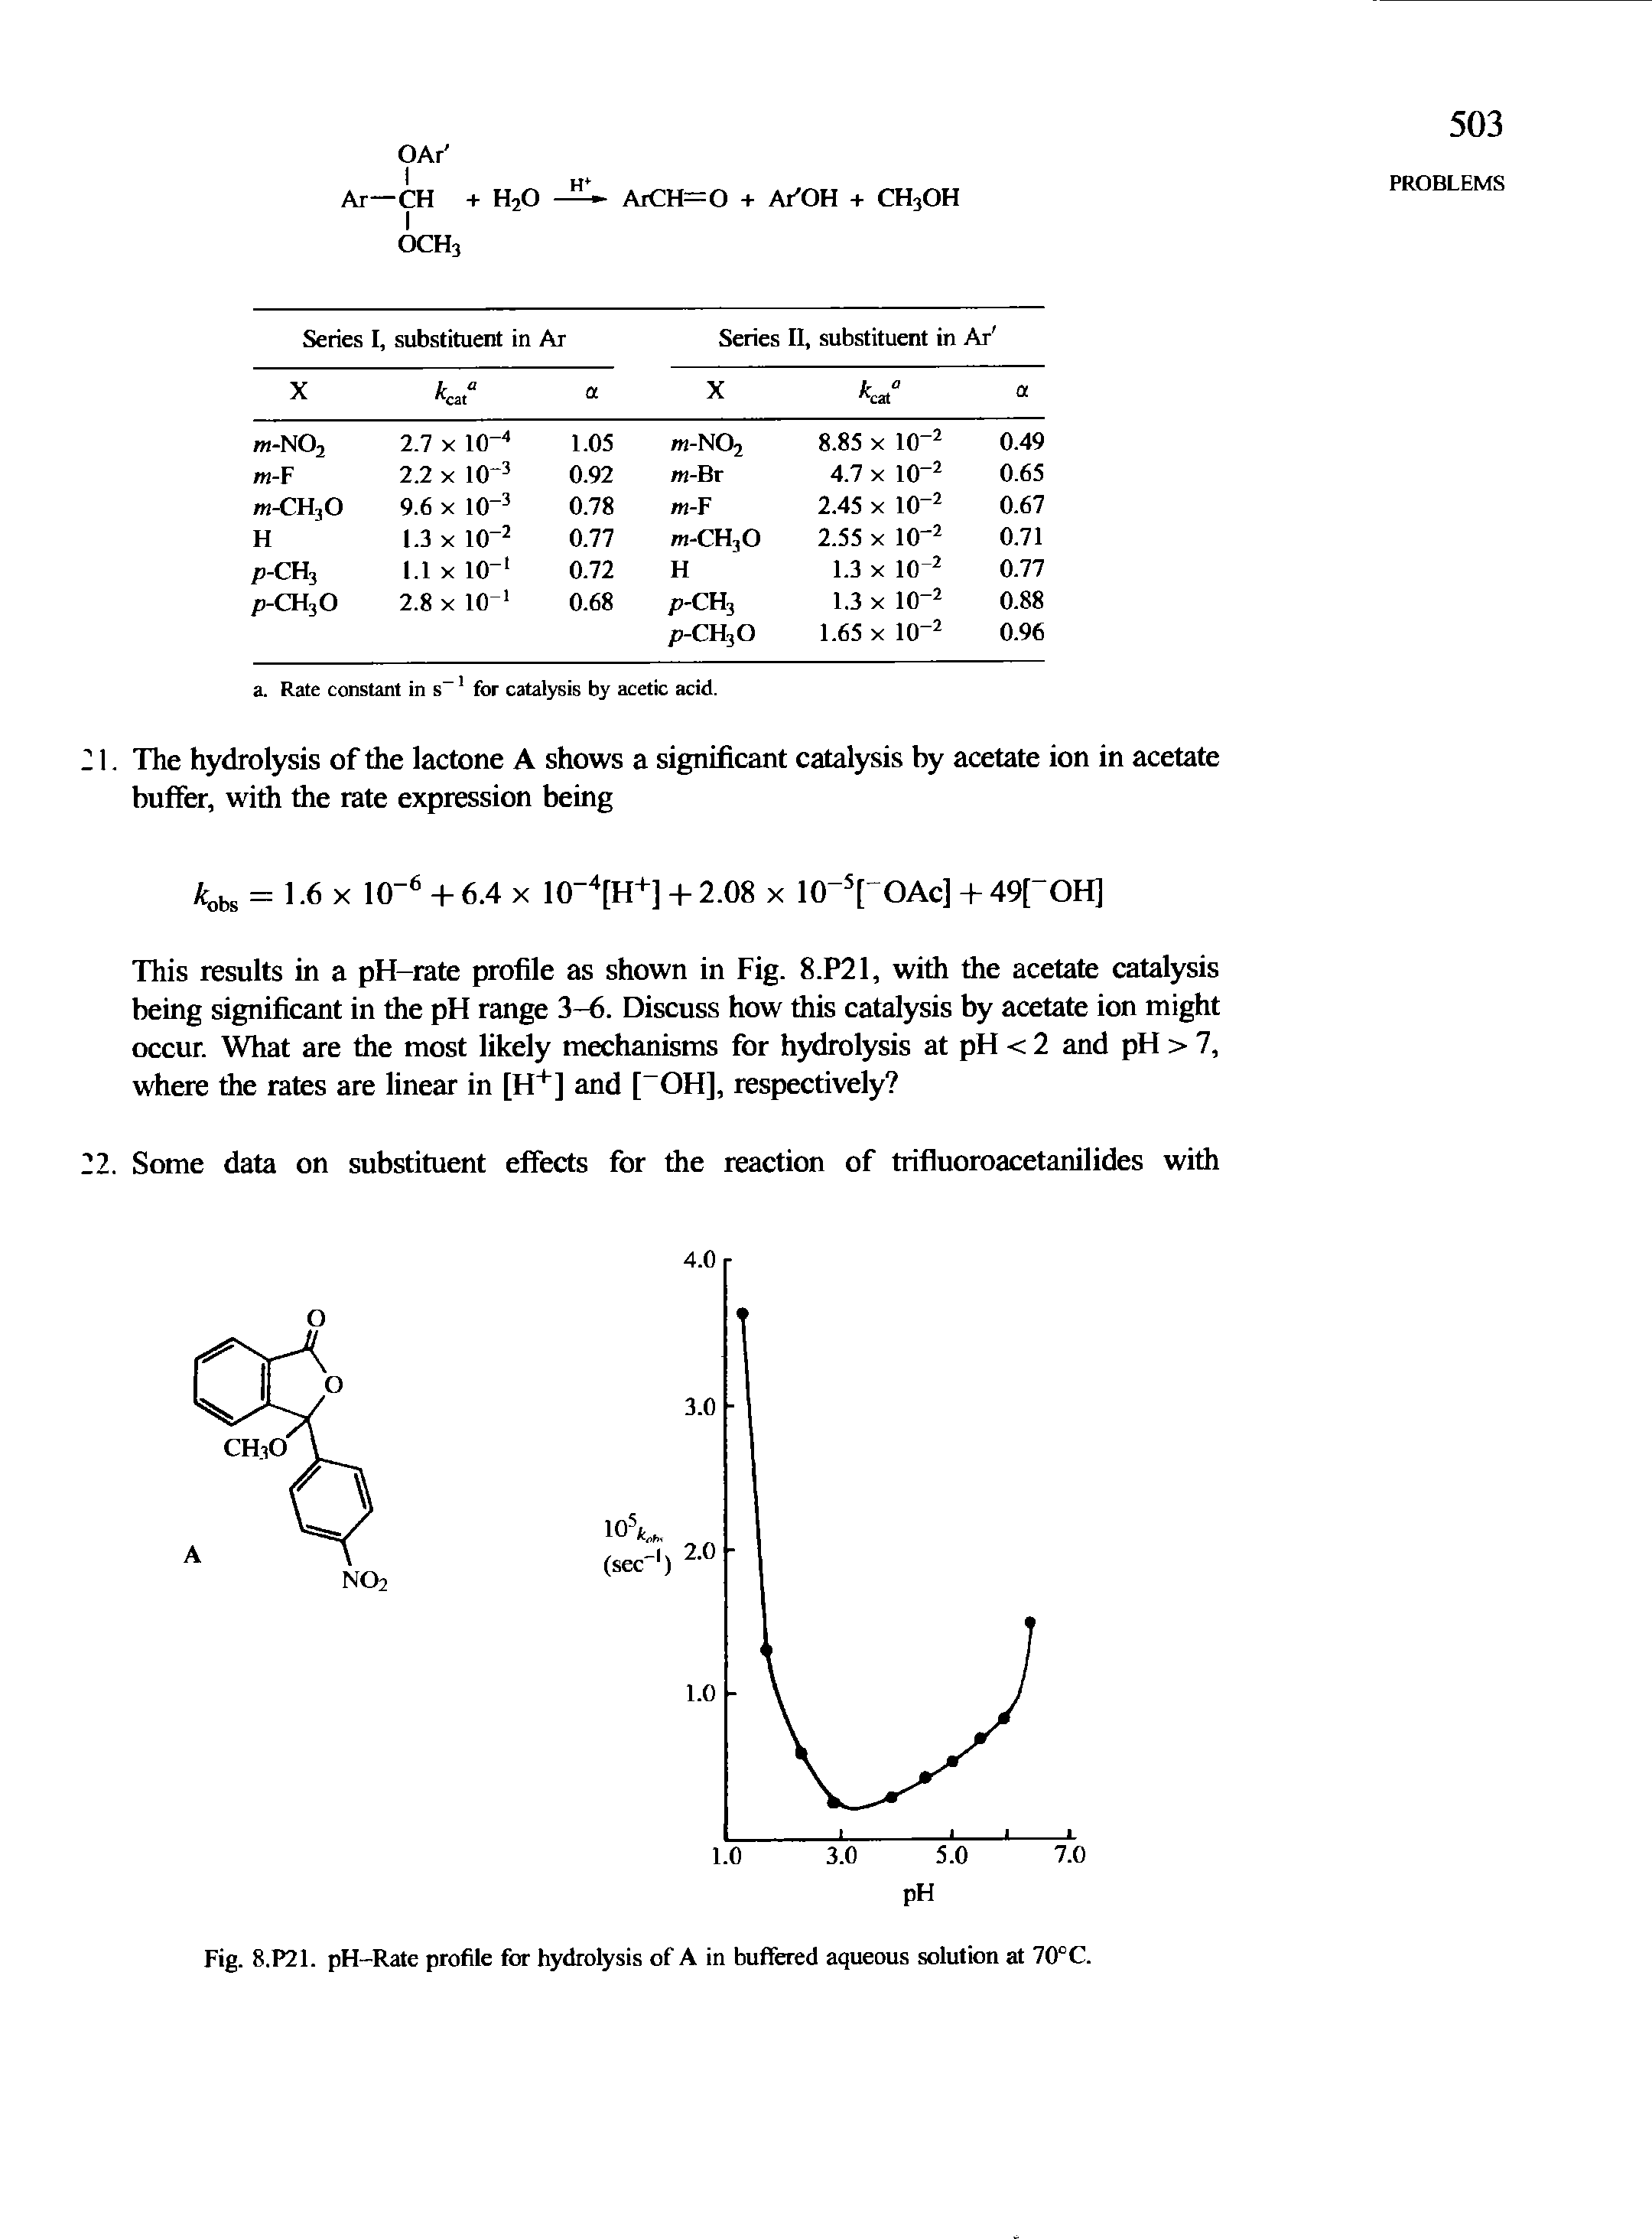 Fig. 8.P21. pH-Rate profile for hydrolysis of A in buffered aqueous solution at 70 C.